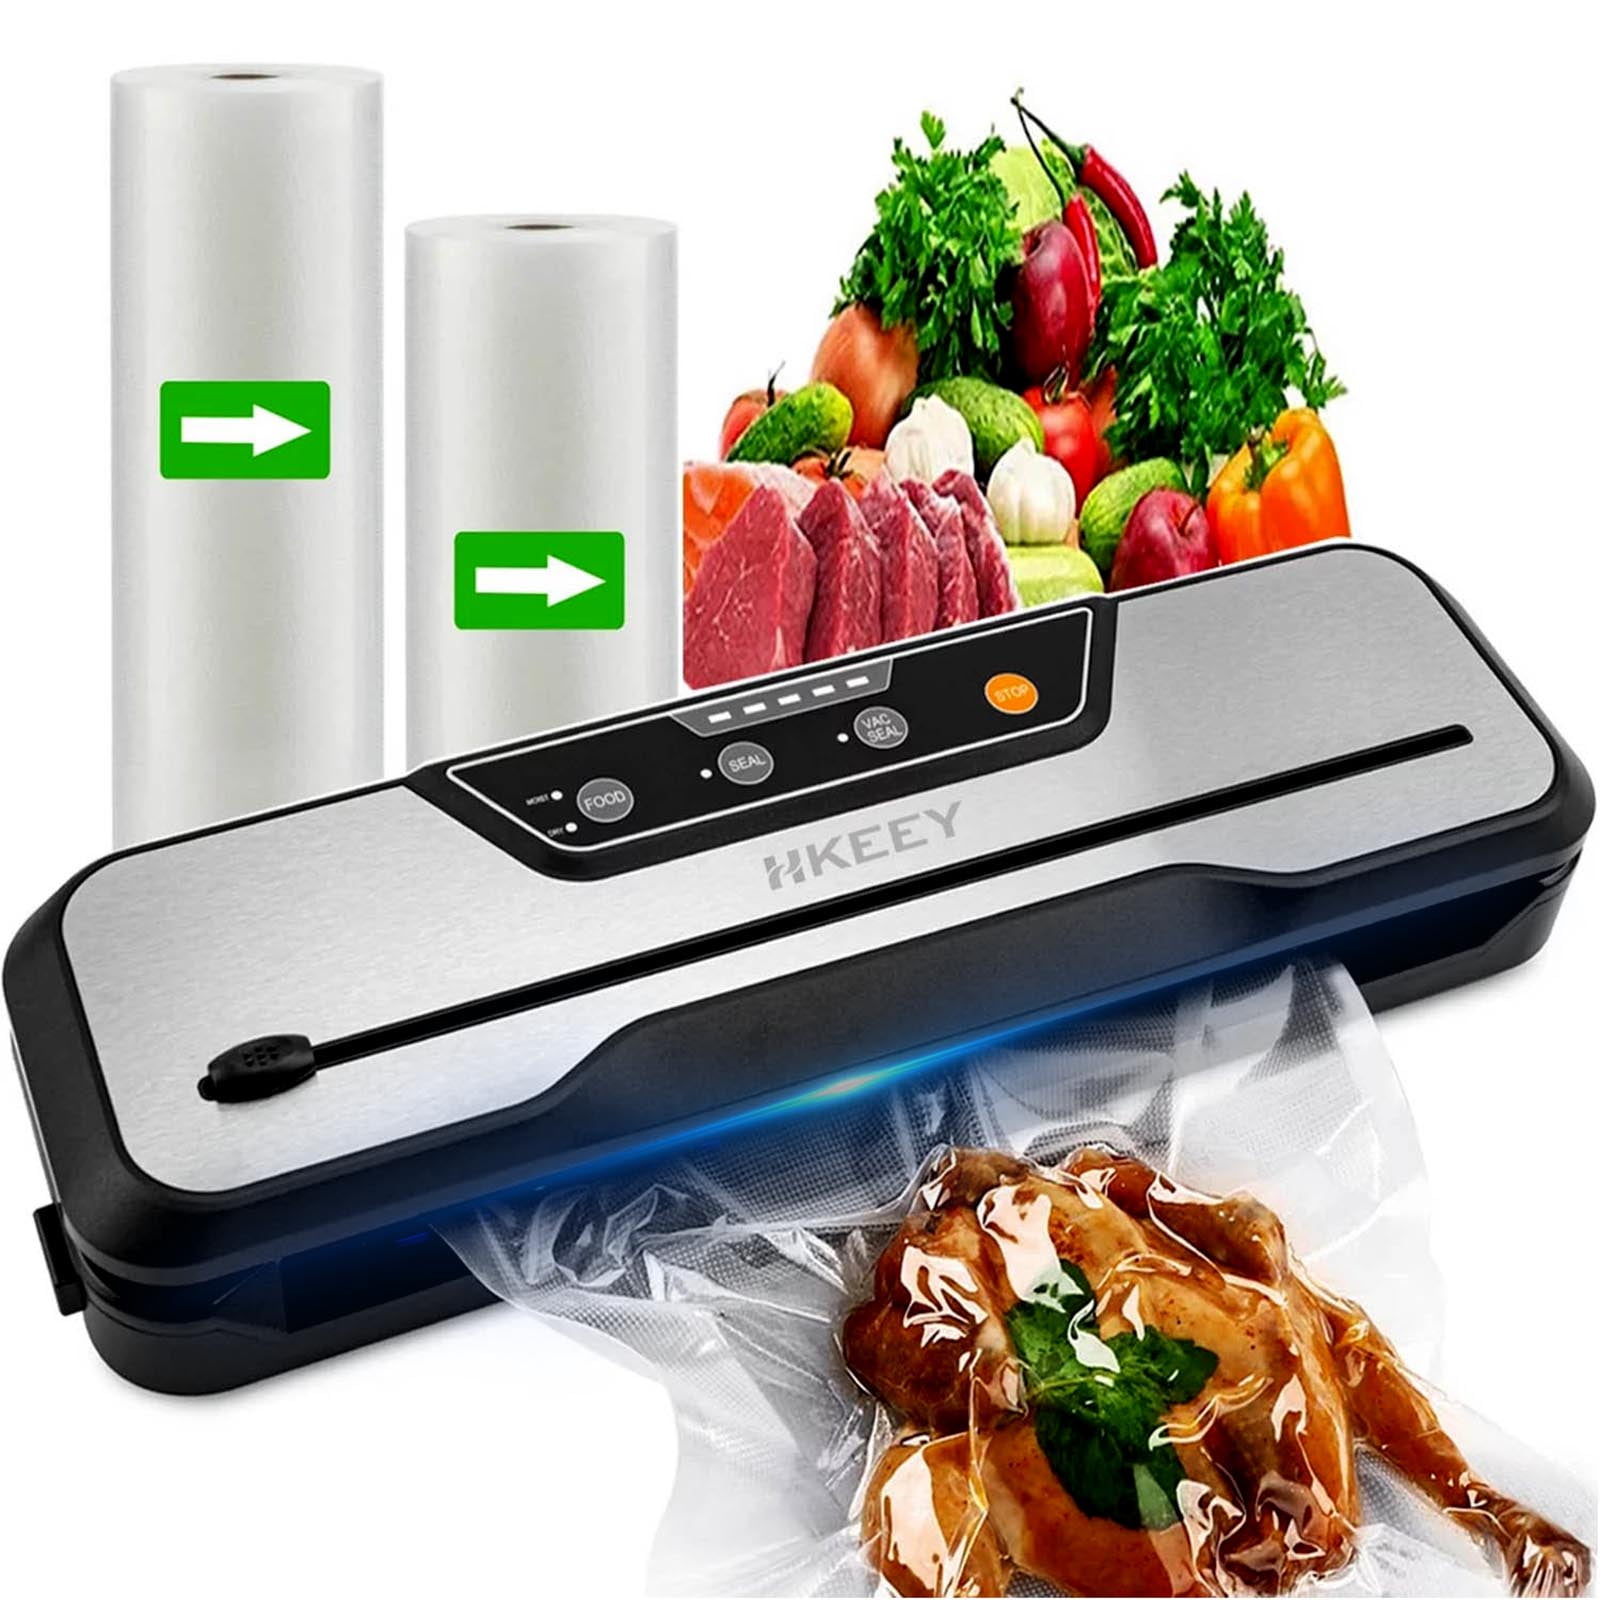 GERYON Vacuum Sealer Machine, Food Vacuum Sealer with Powerful Suction |  Slim Design | Easy to Use | Led Indicator Lights for Sous Vide, Meal Prep